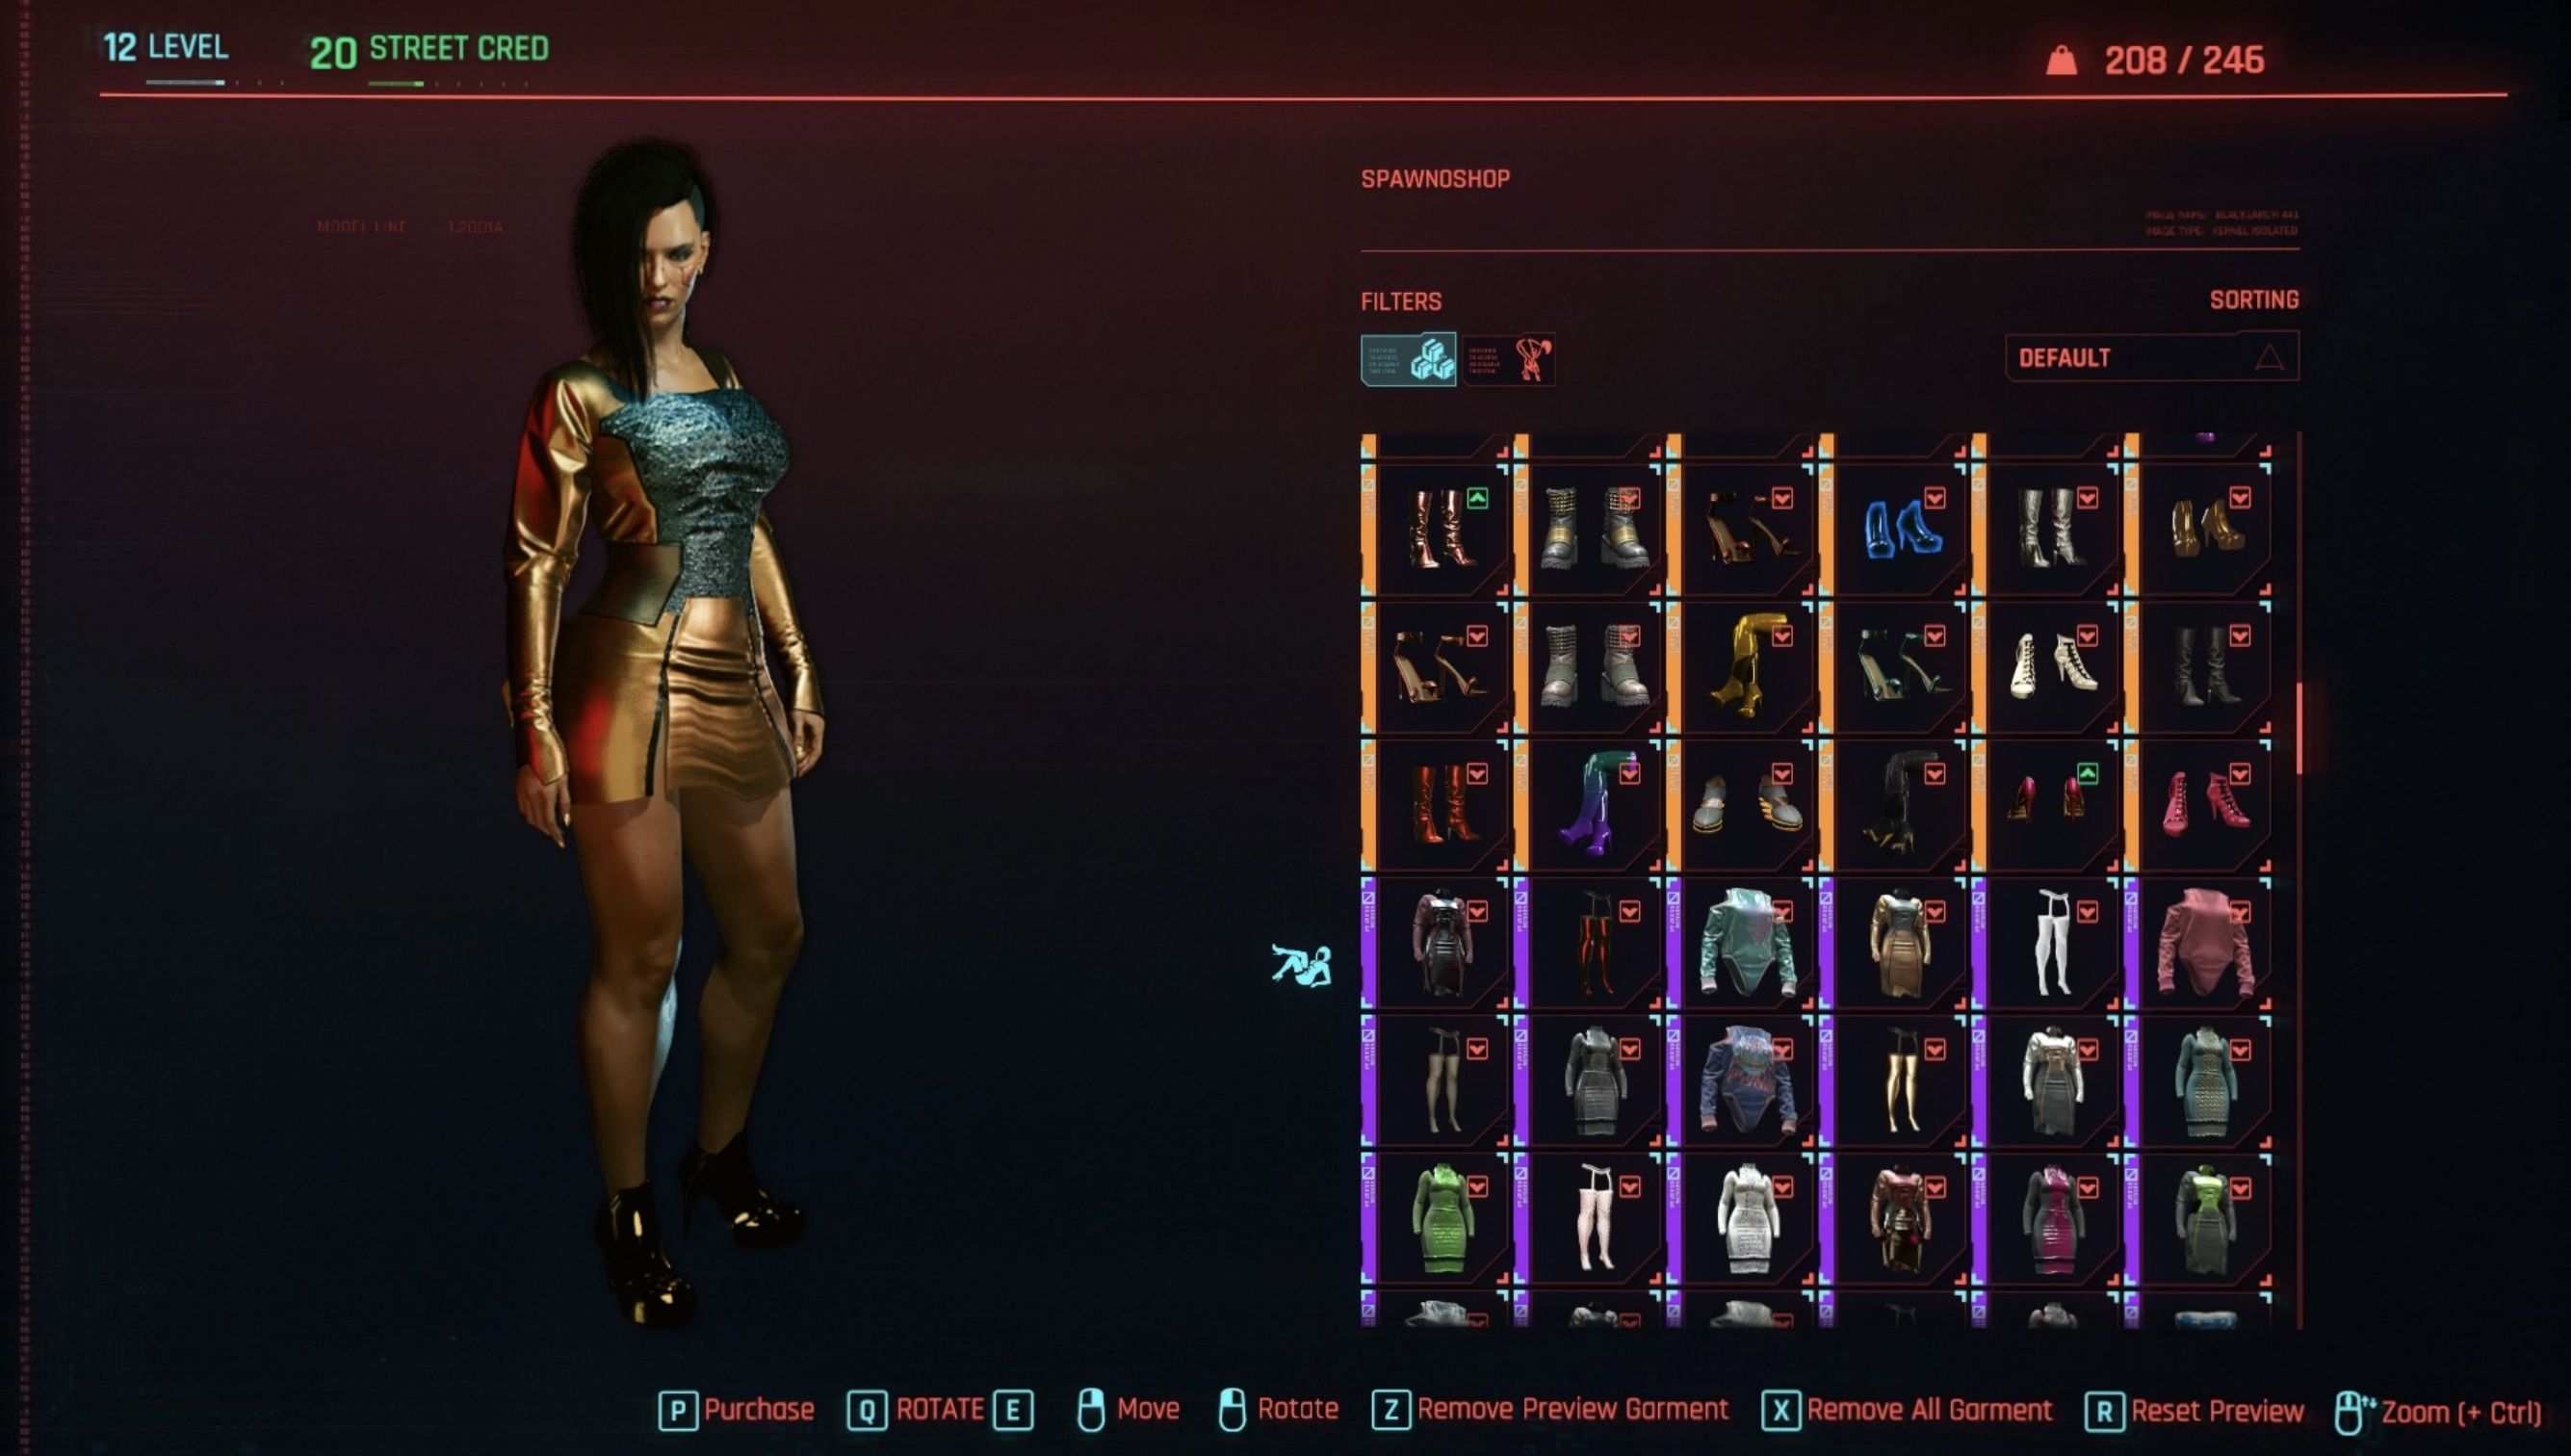 clothing-and-lingerie-store-from-better-clothes-mod-spawn0-cyberpunk-2077-5.png